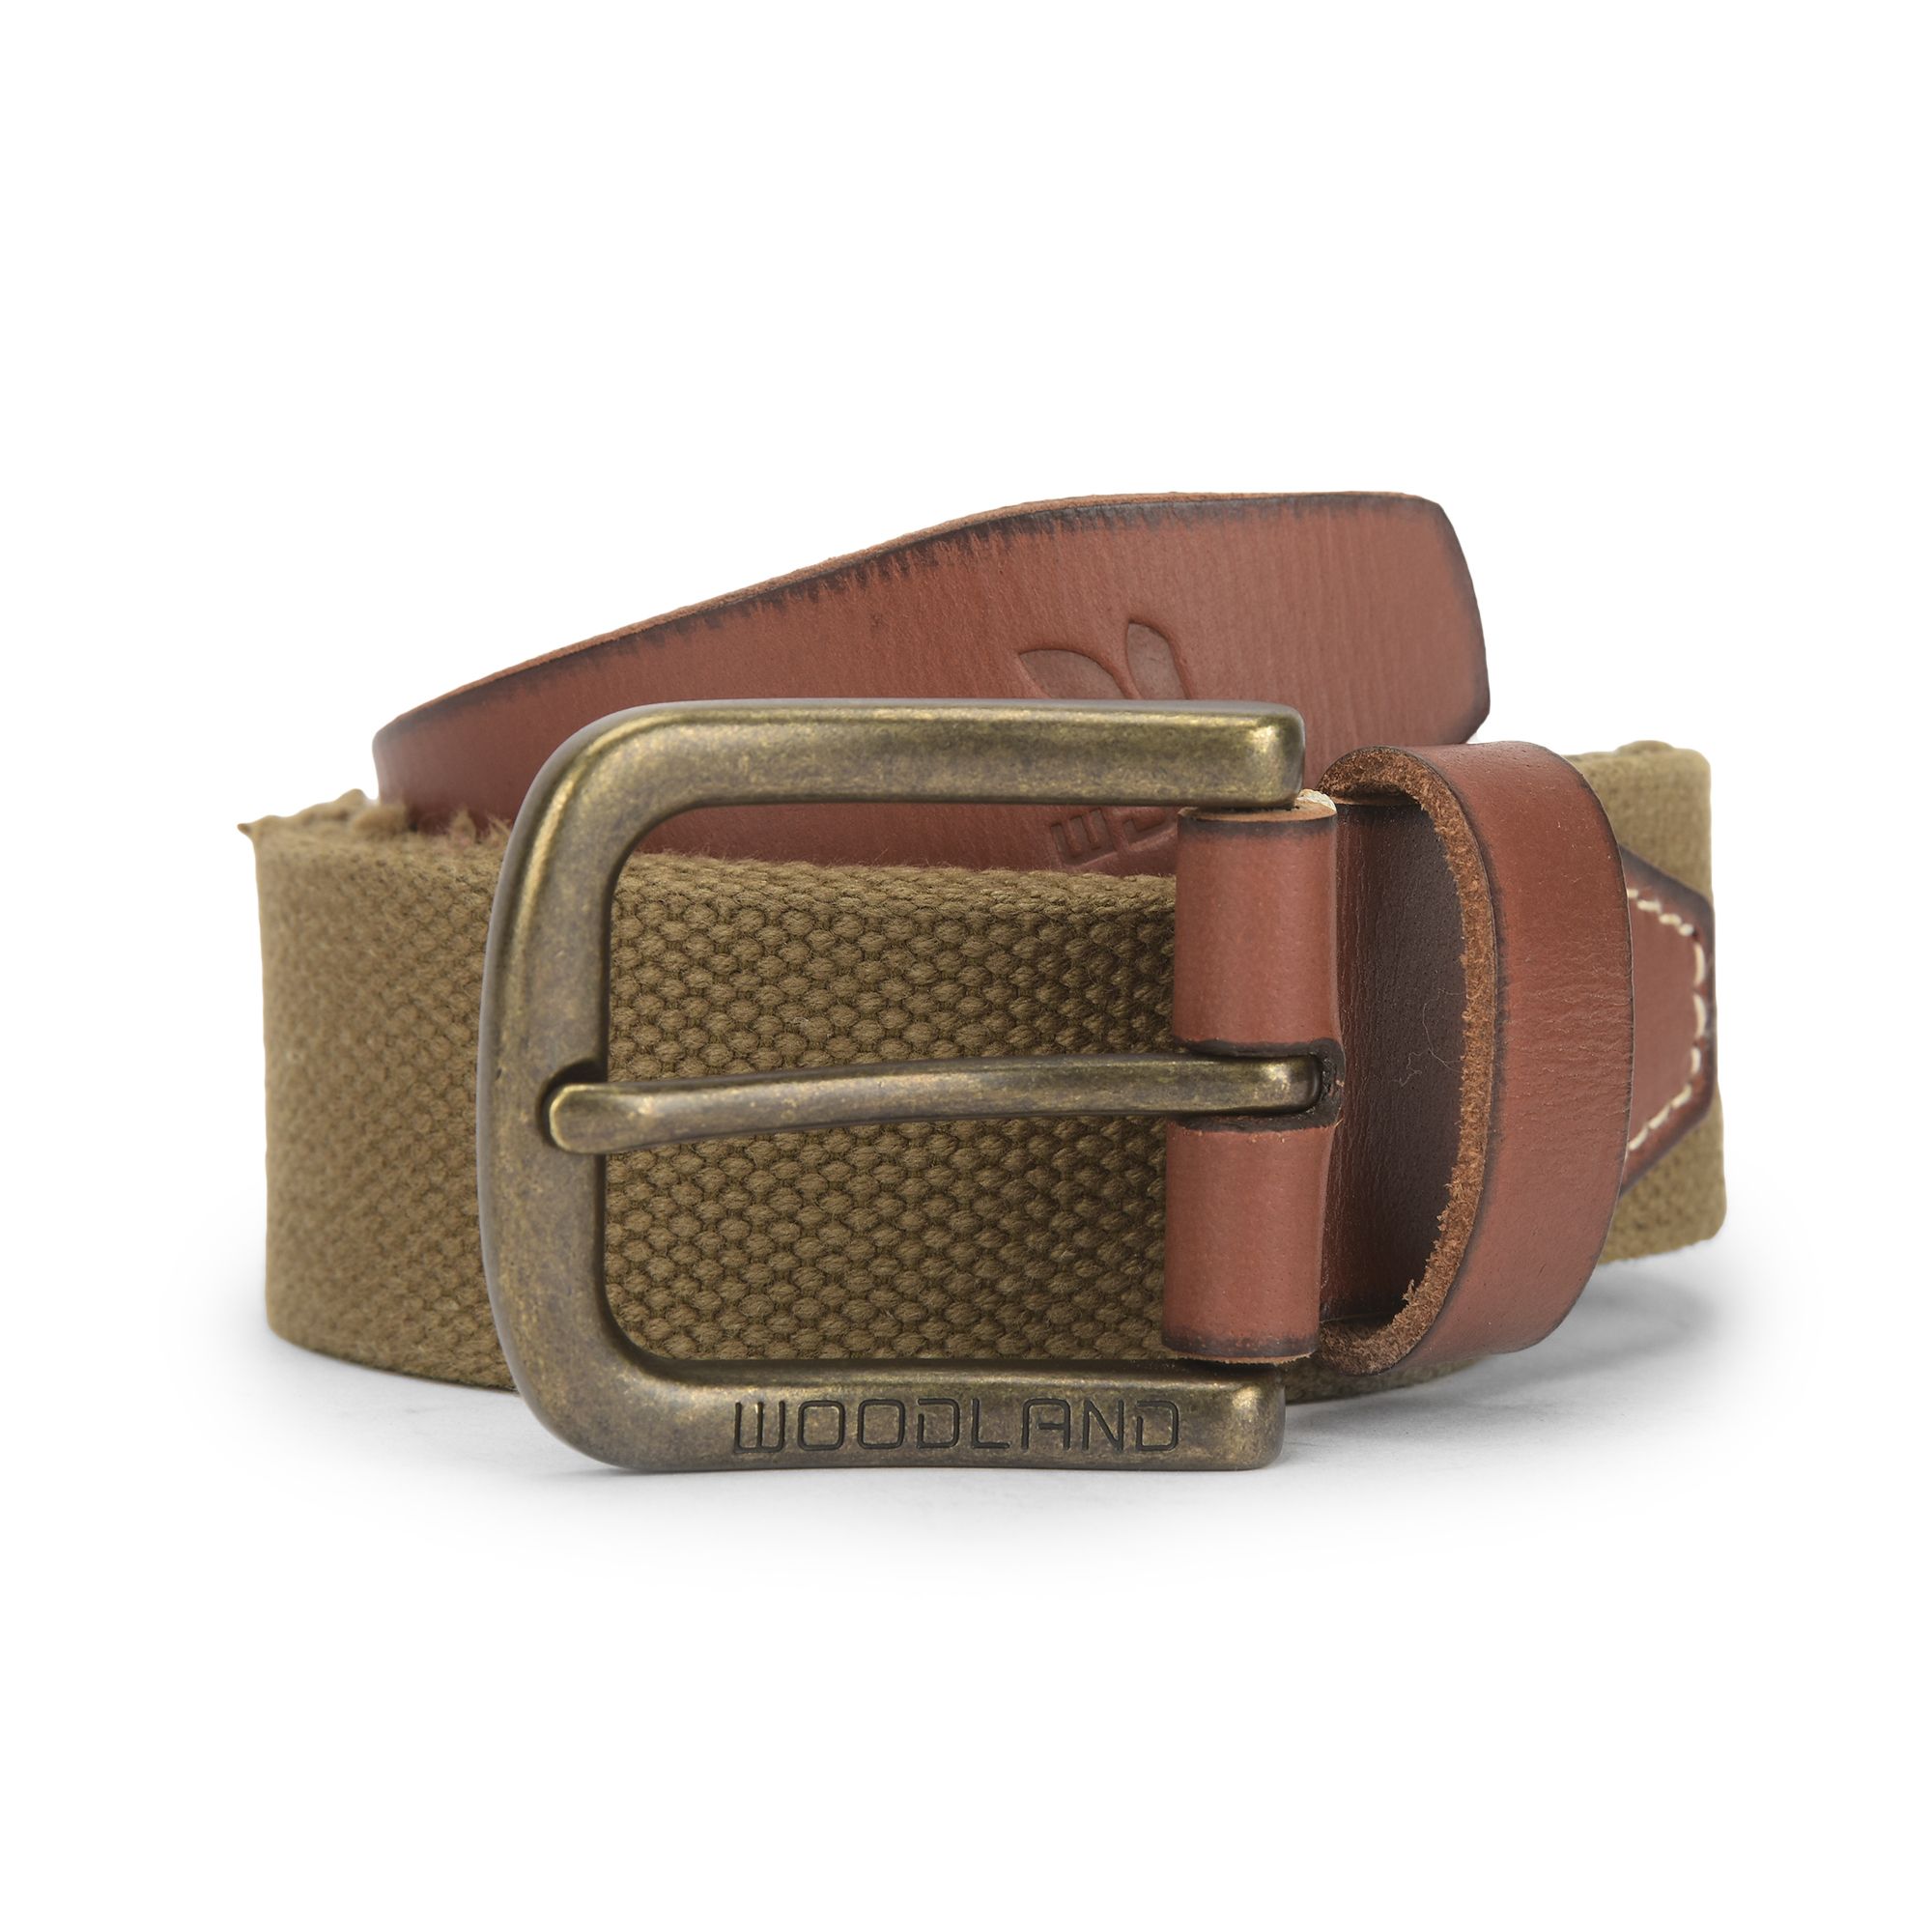 Buy Woodland Leather Men's Belt and Tan Wallet Combo (B14, Brown, Free  Size) at Amazon.in